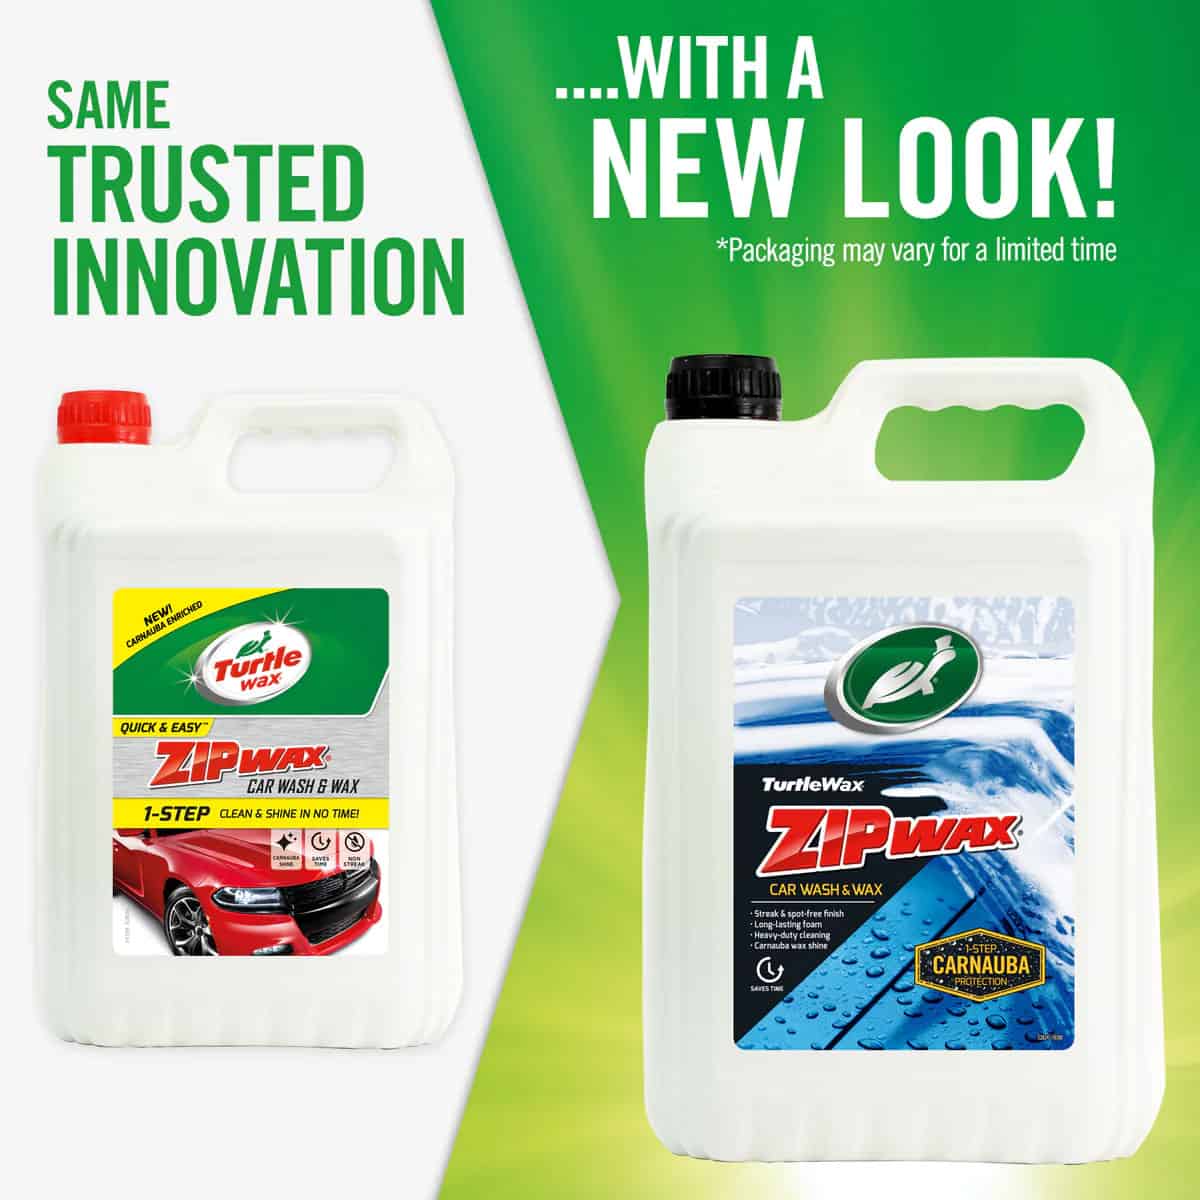 Wash and wax with ease! Turtle Wax Zip Wax is the most traditional of car shampoos, allowing you to shampoo wash your car, cleaning it while leaving behind a rich Carnauba-infused wax layer for instant & lasting shine! - packaging